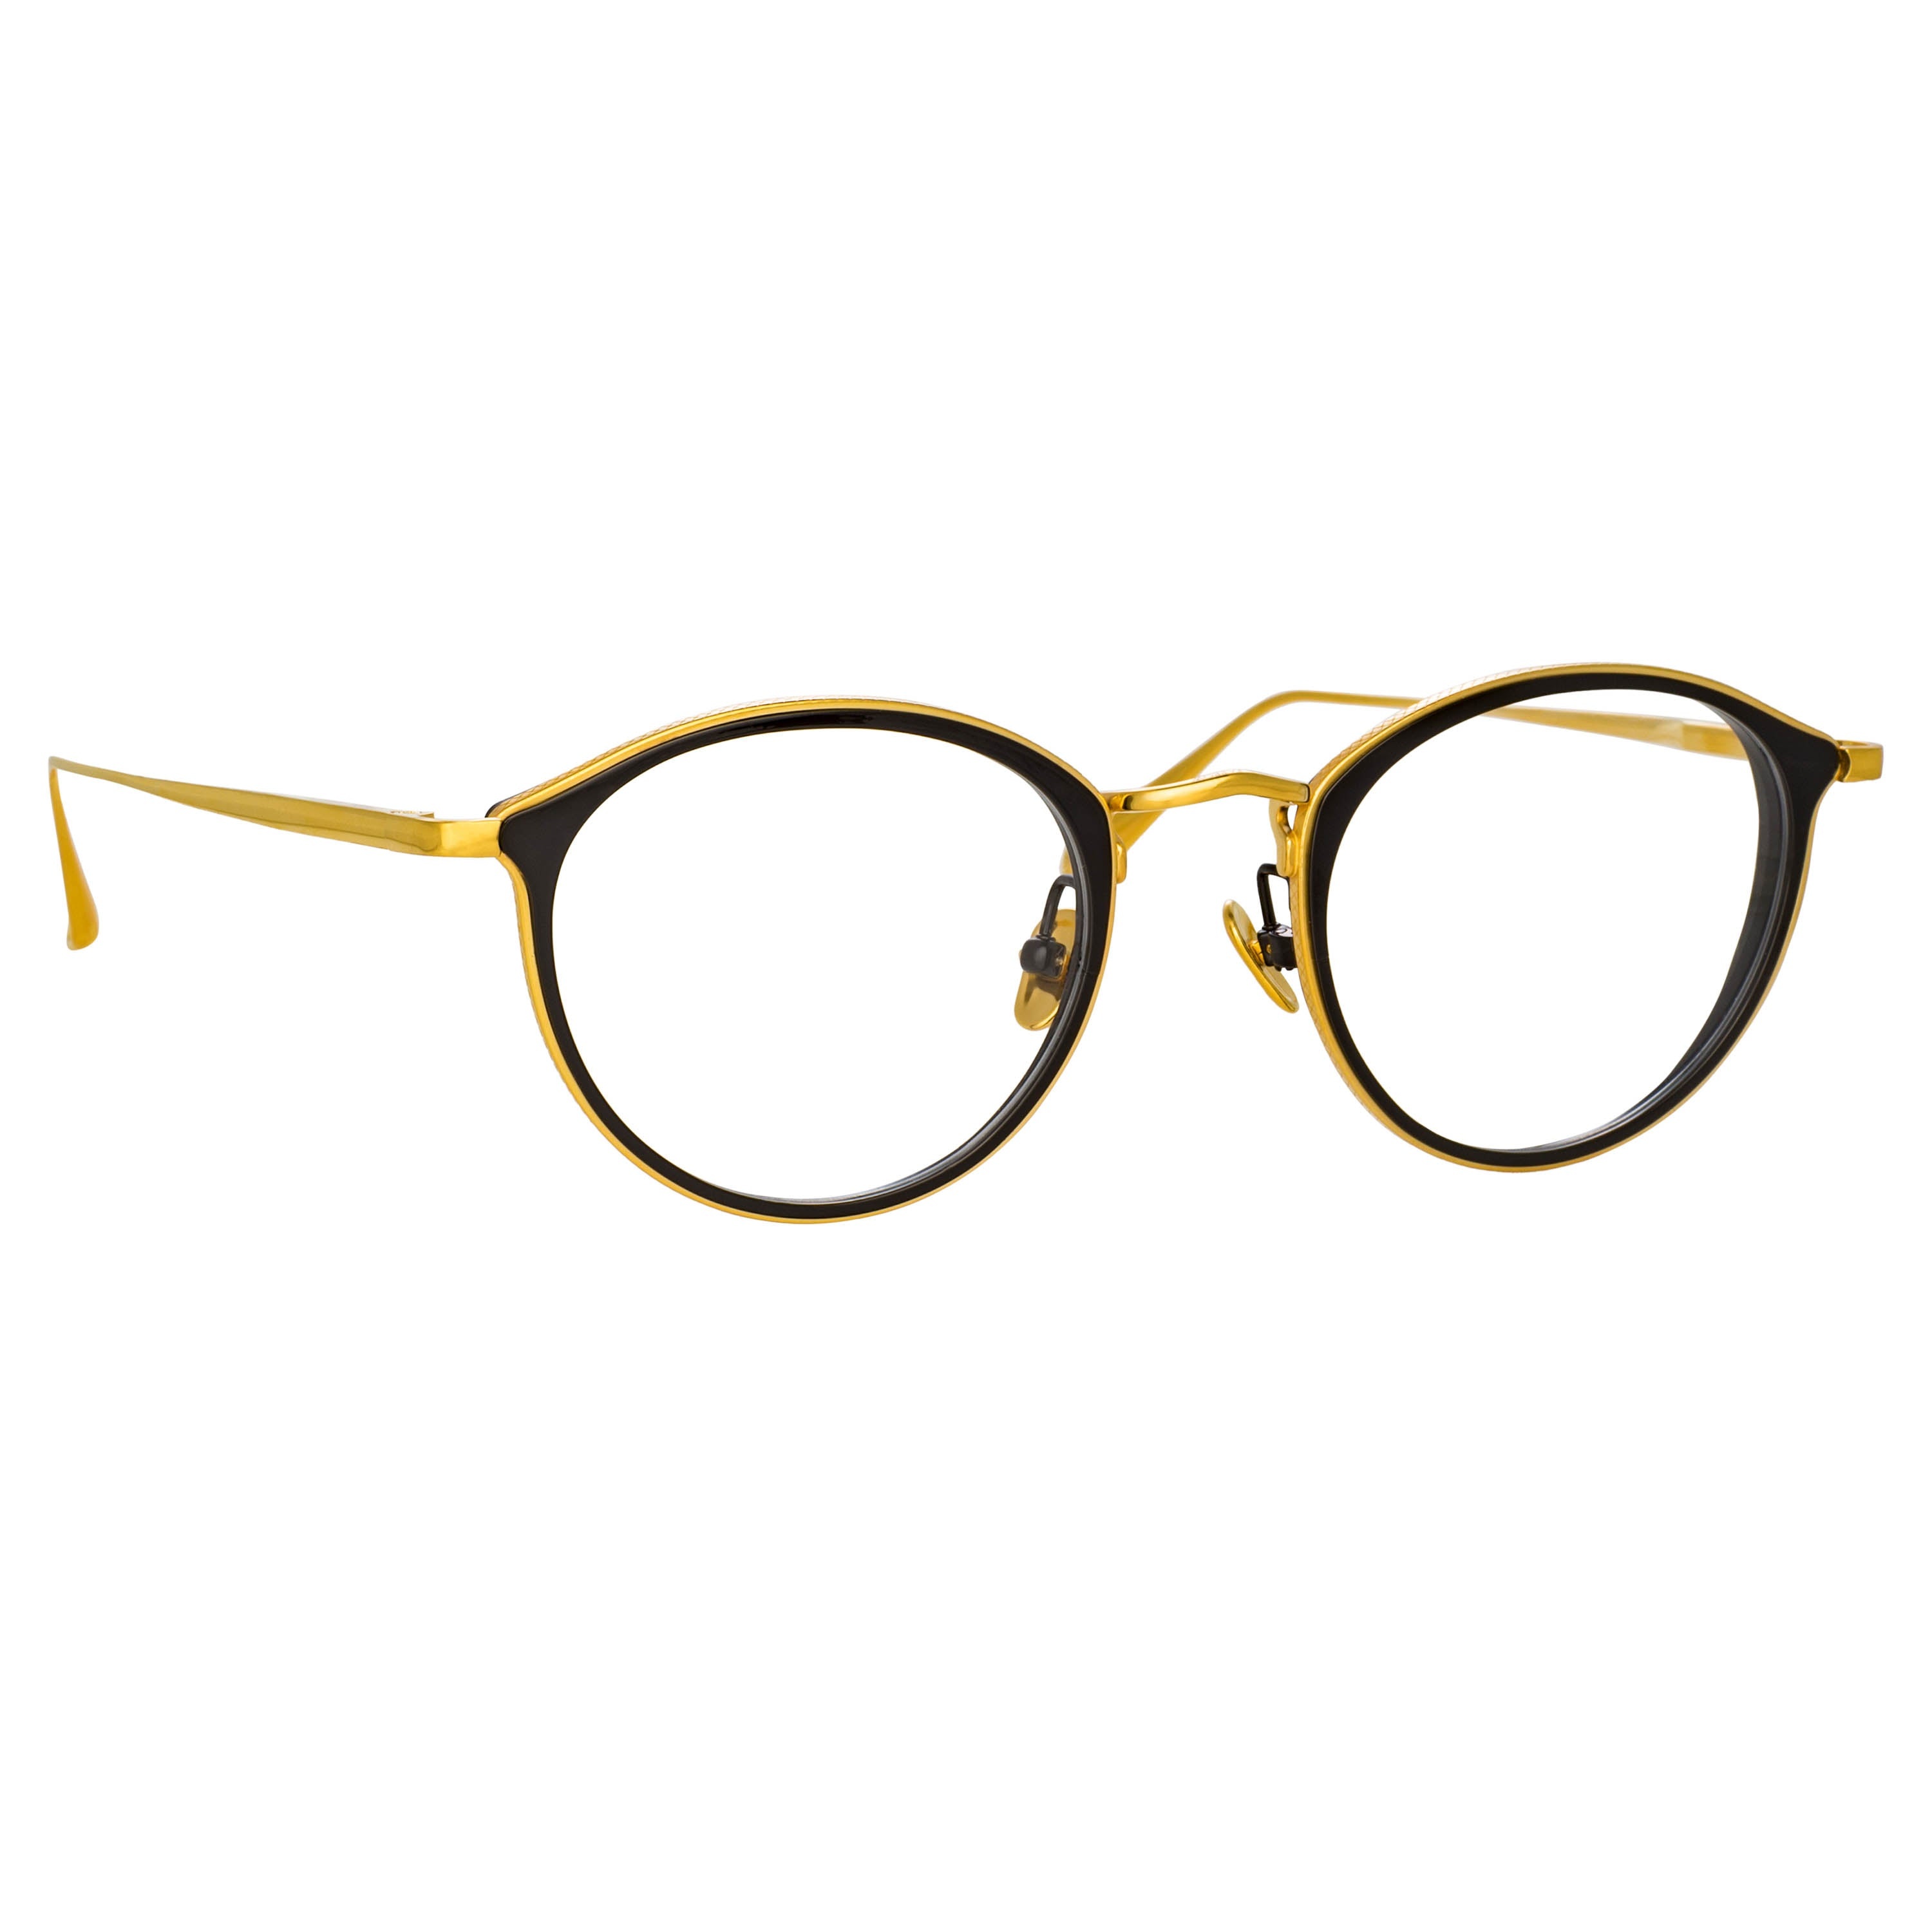 LUIS OVAL OPTICAL FRAME IN YELLOW GOLD AND BLACK - 4